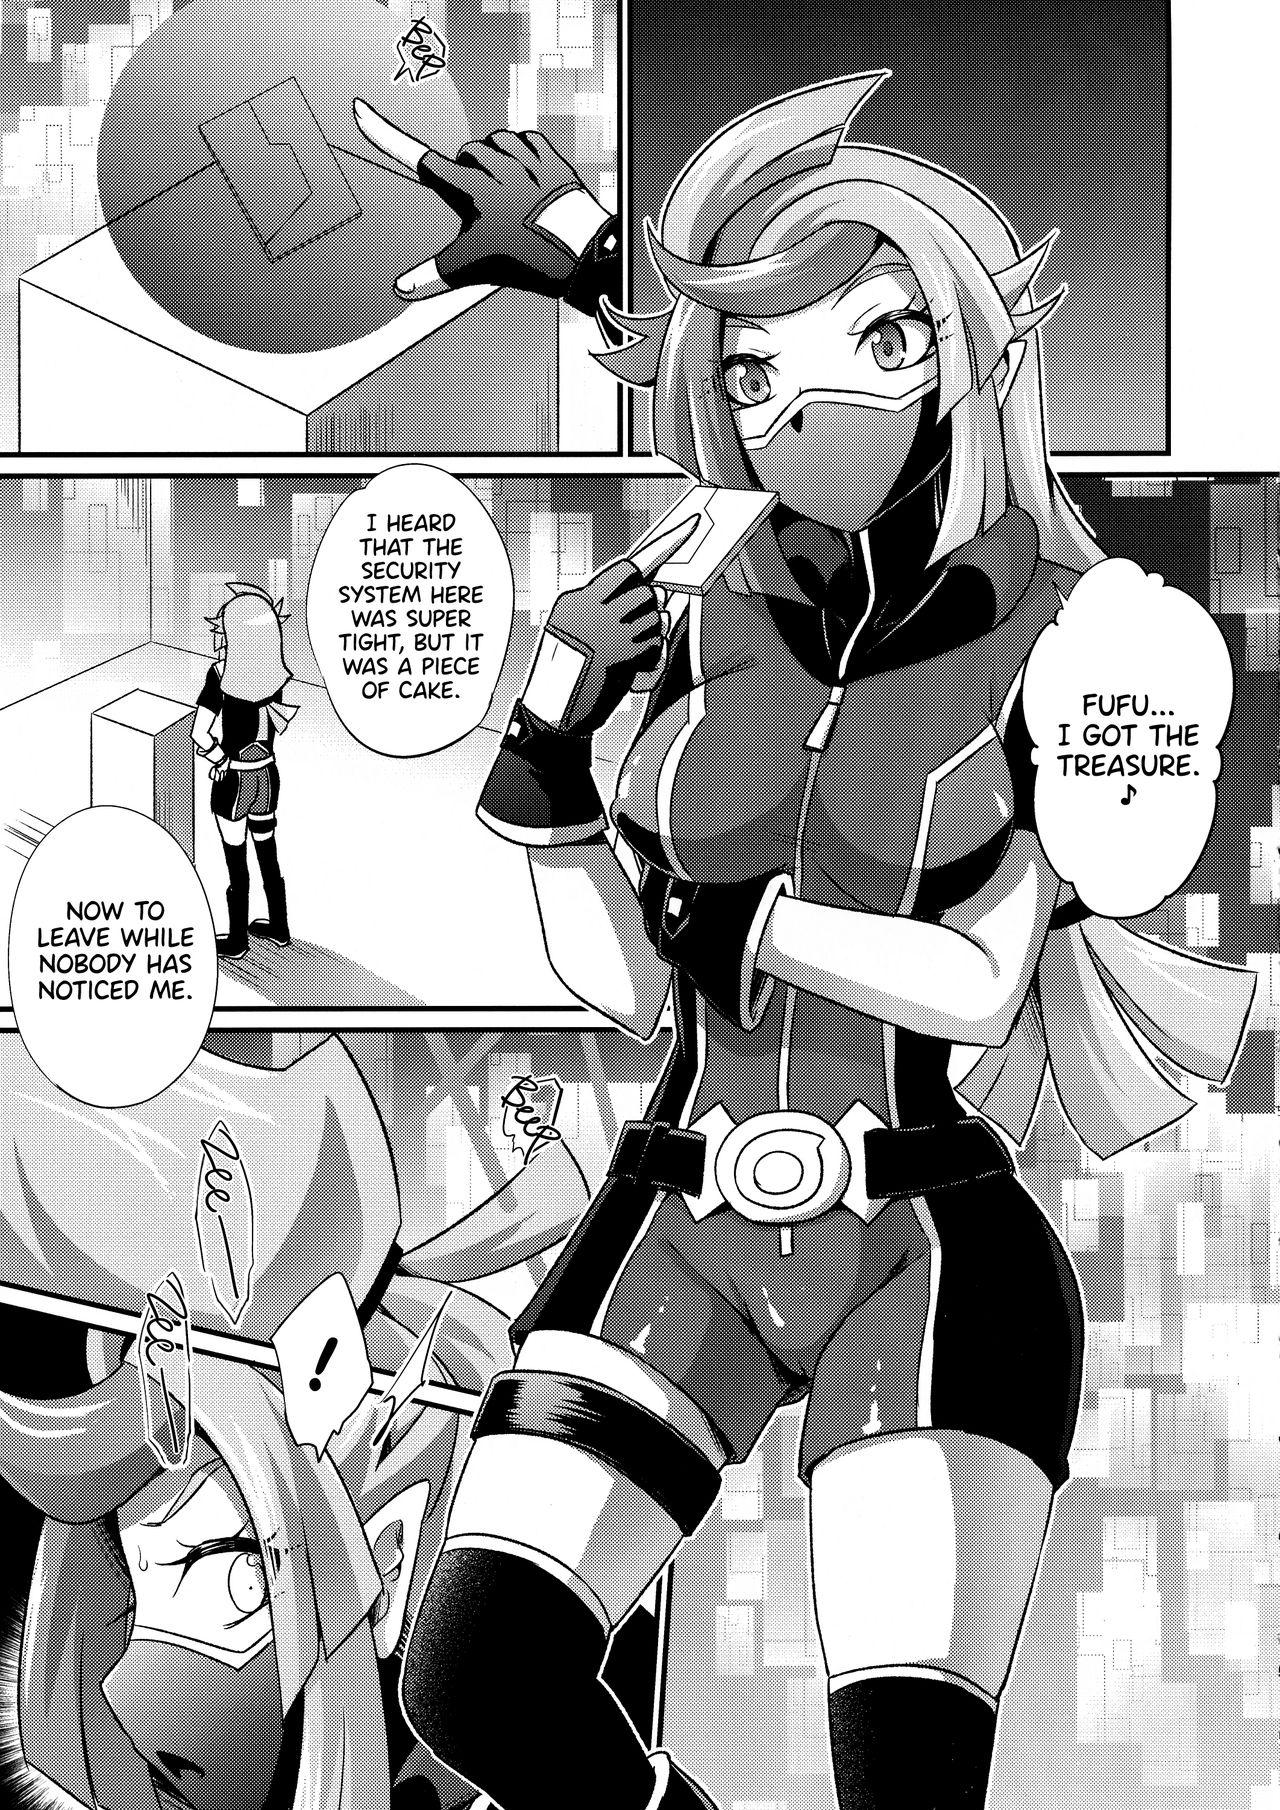 Gayporn CYBER R AREA - Yu-gi-oh vrains Assfucking - Page 3